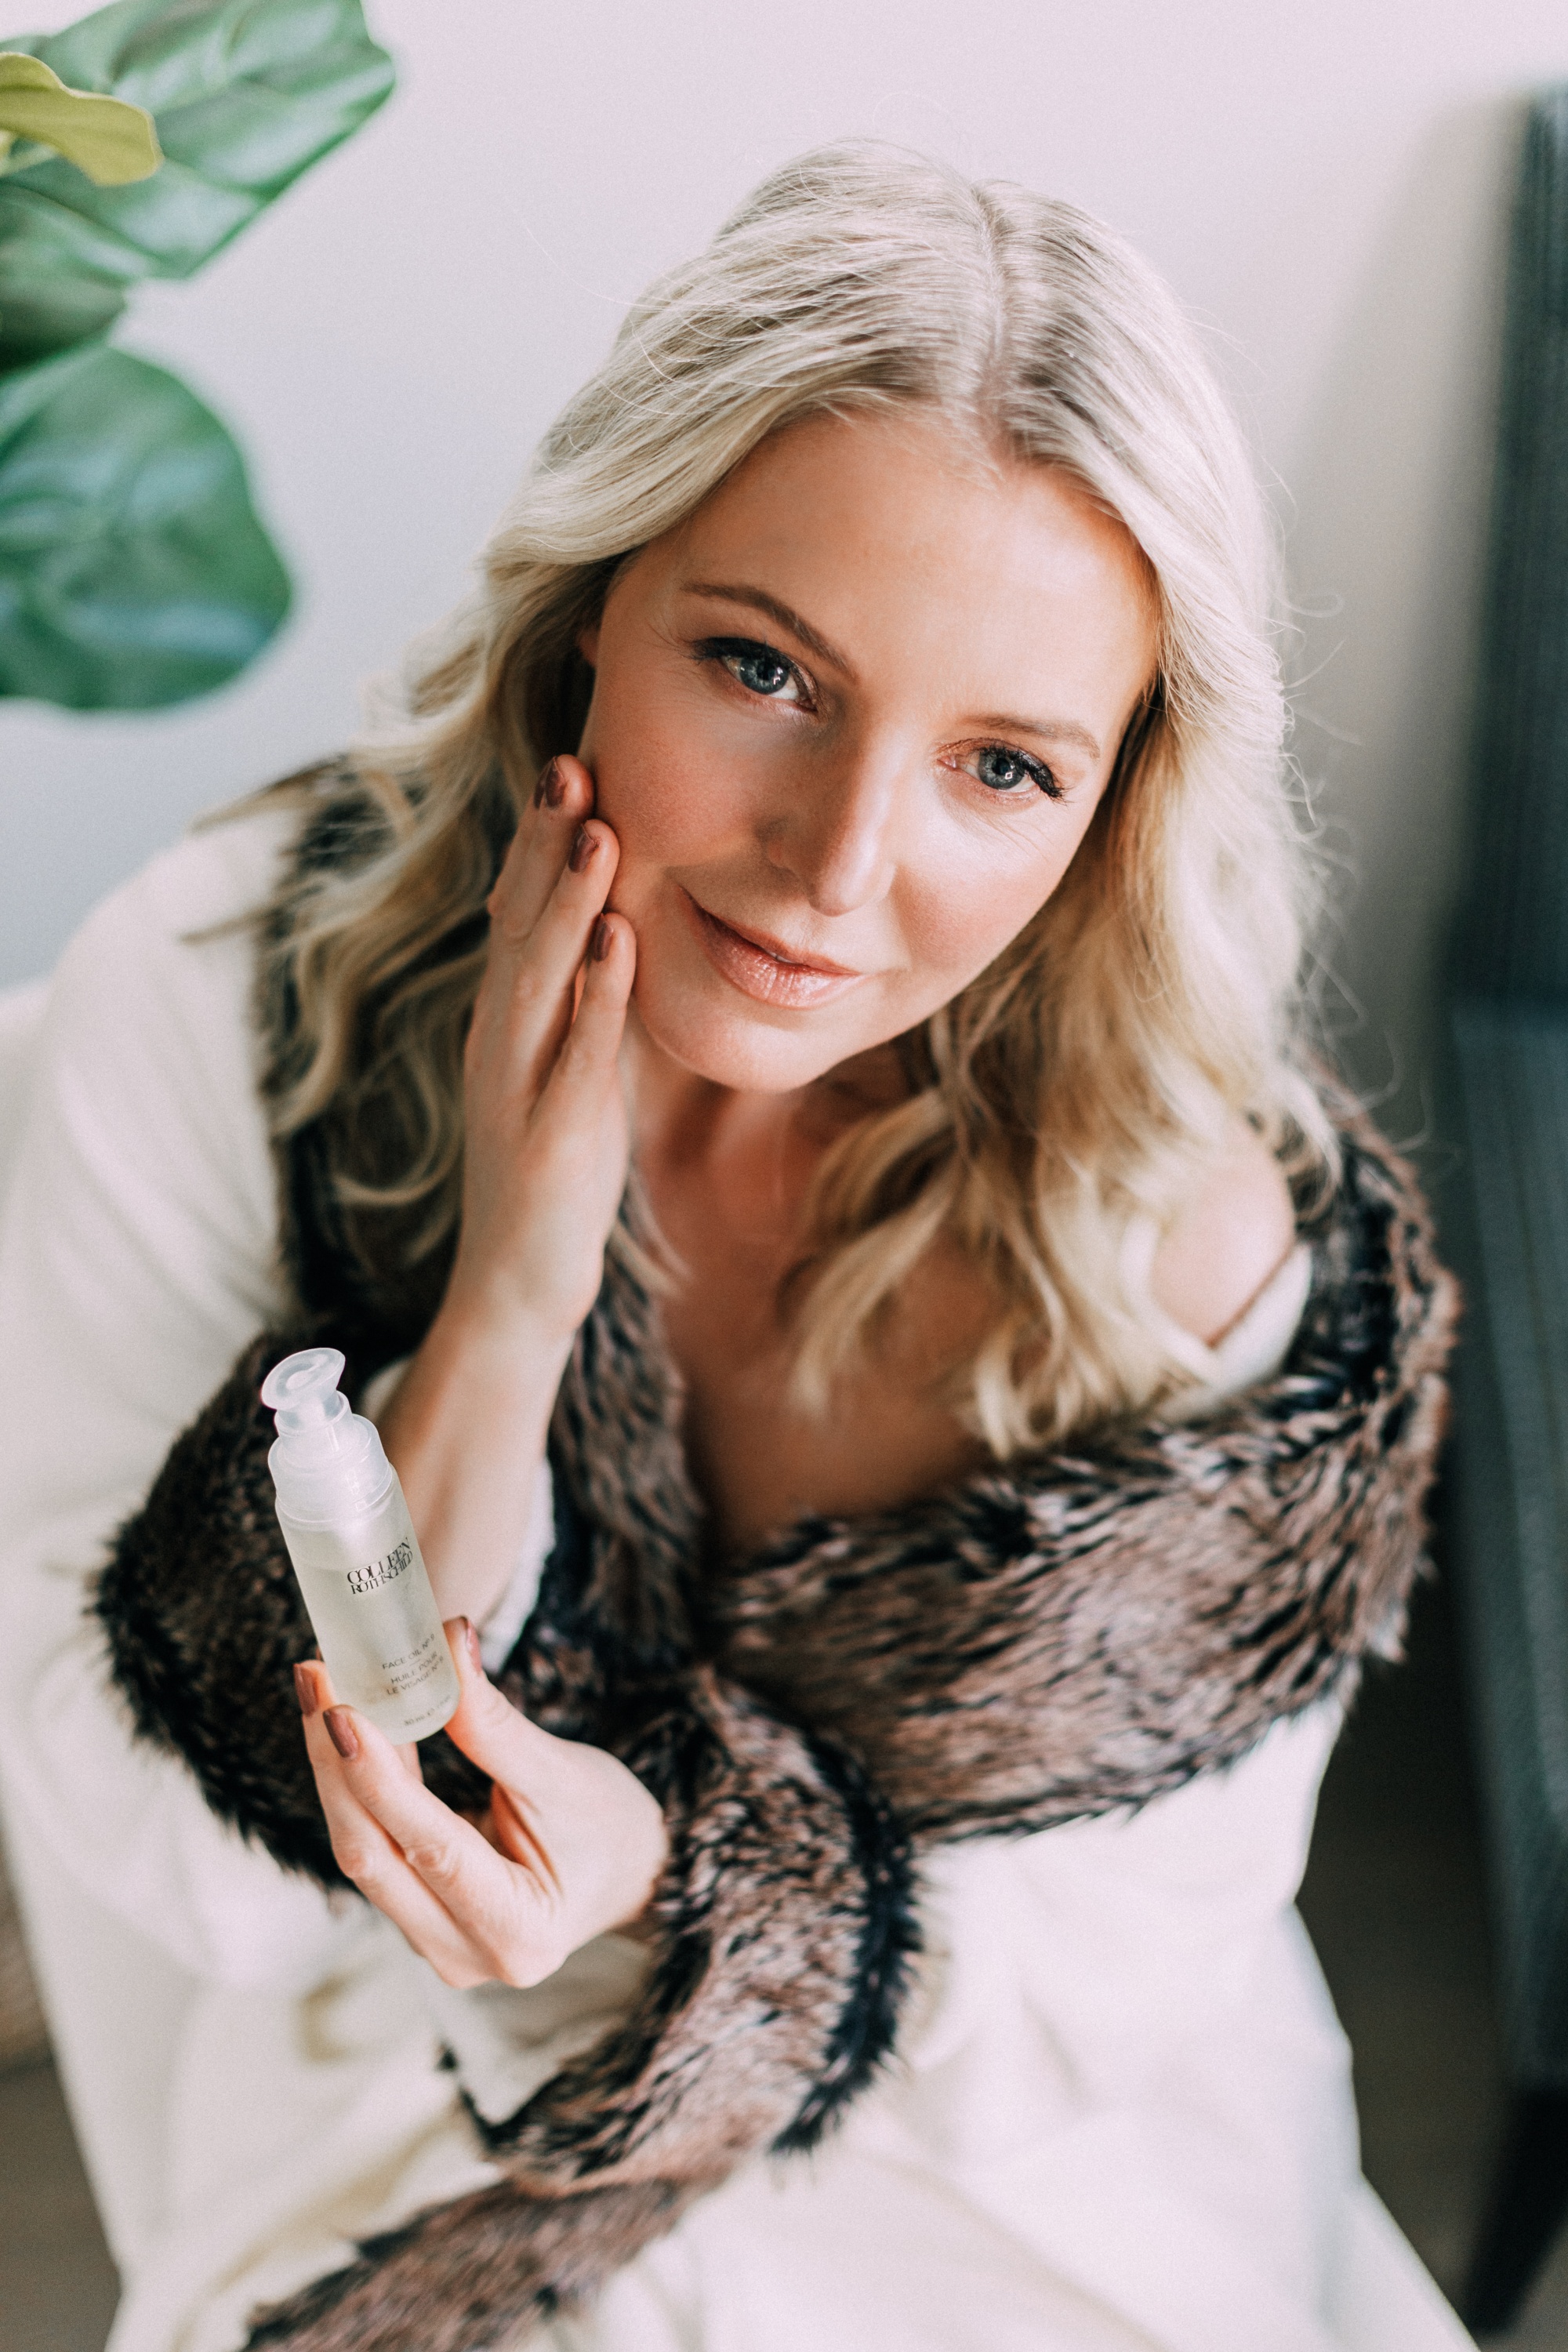 Hydration for your skin, fashion blogger Erin Busbee of BusbeeStyle.com sharing the best Colleen Rothschild products for hydrating your skin including the face oil no 9 in telluride, colorado